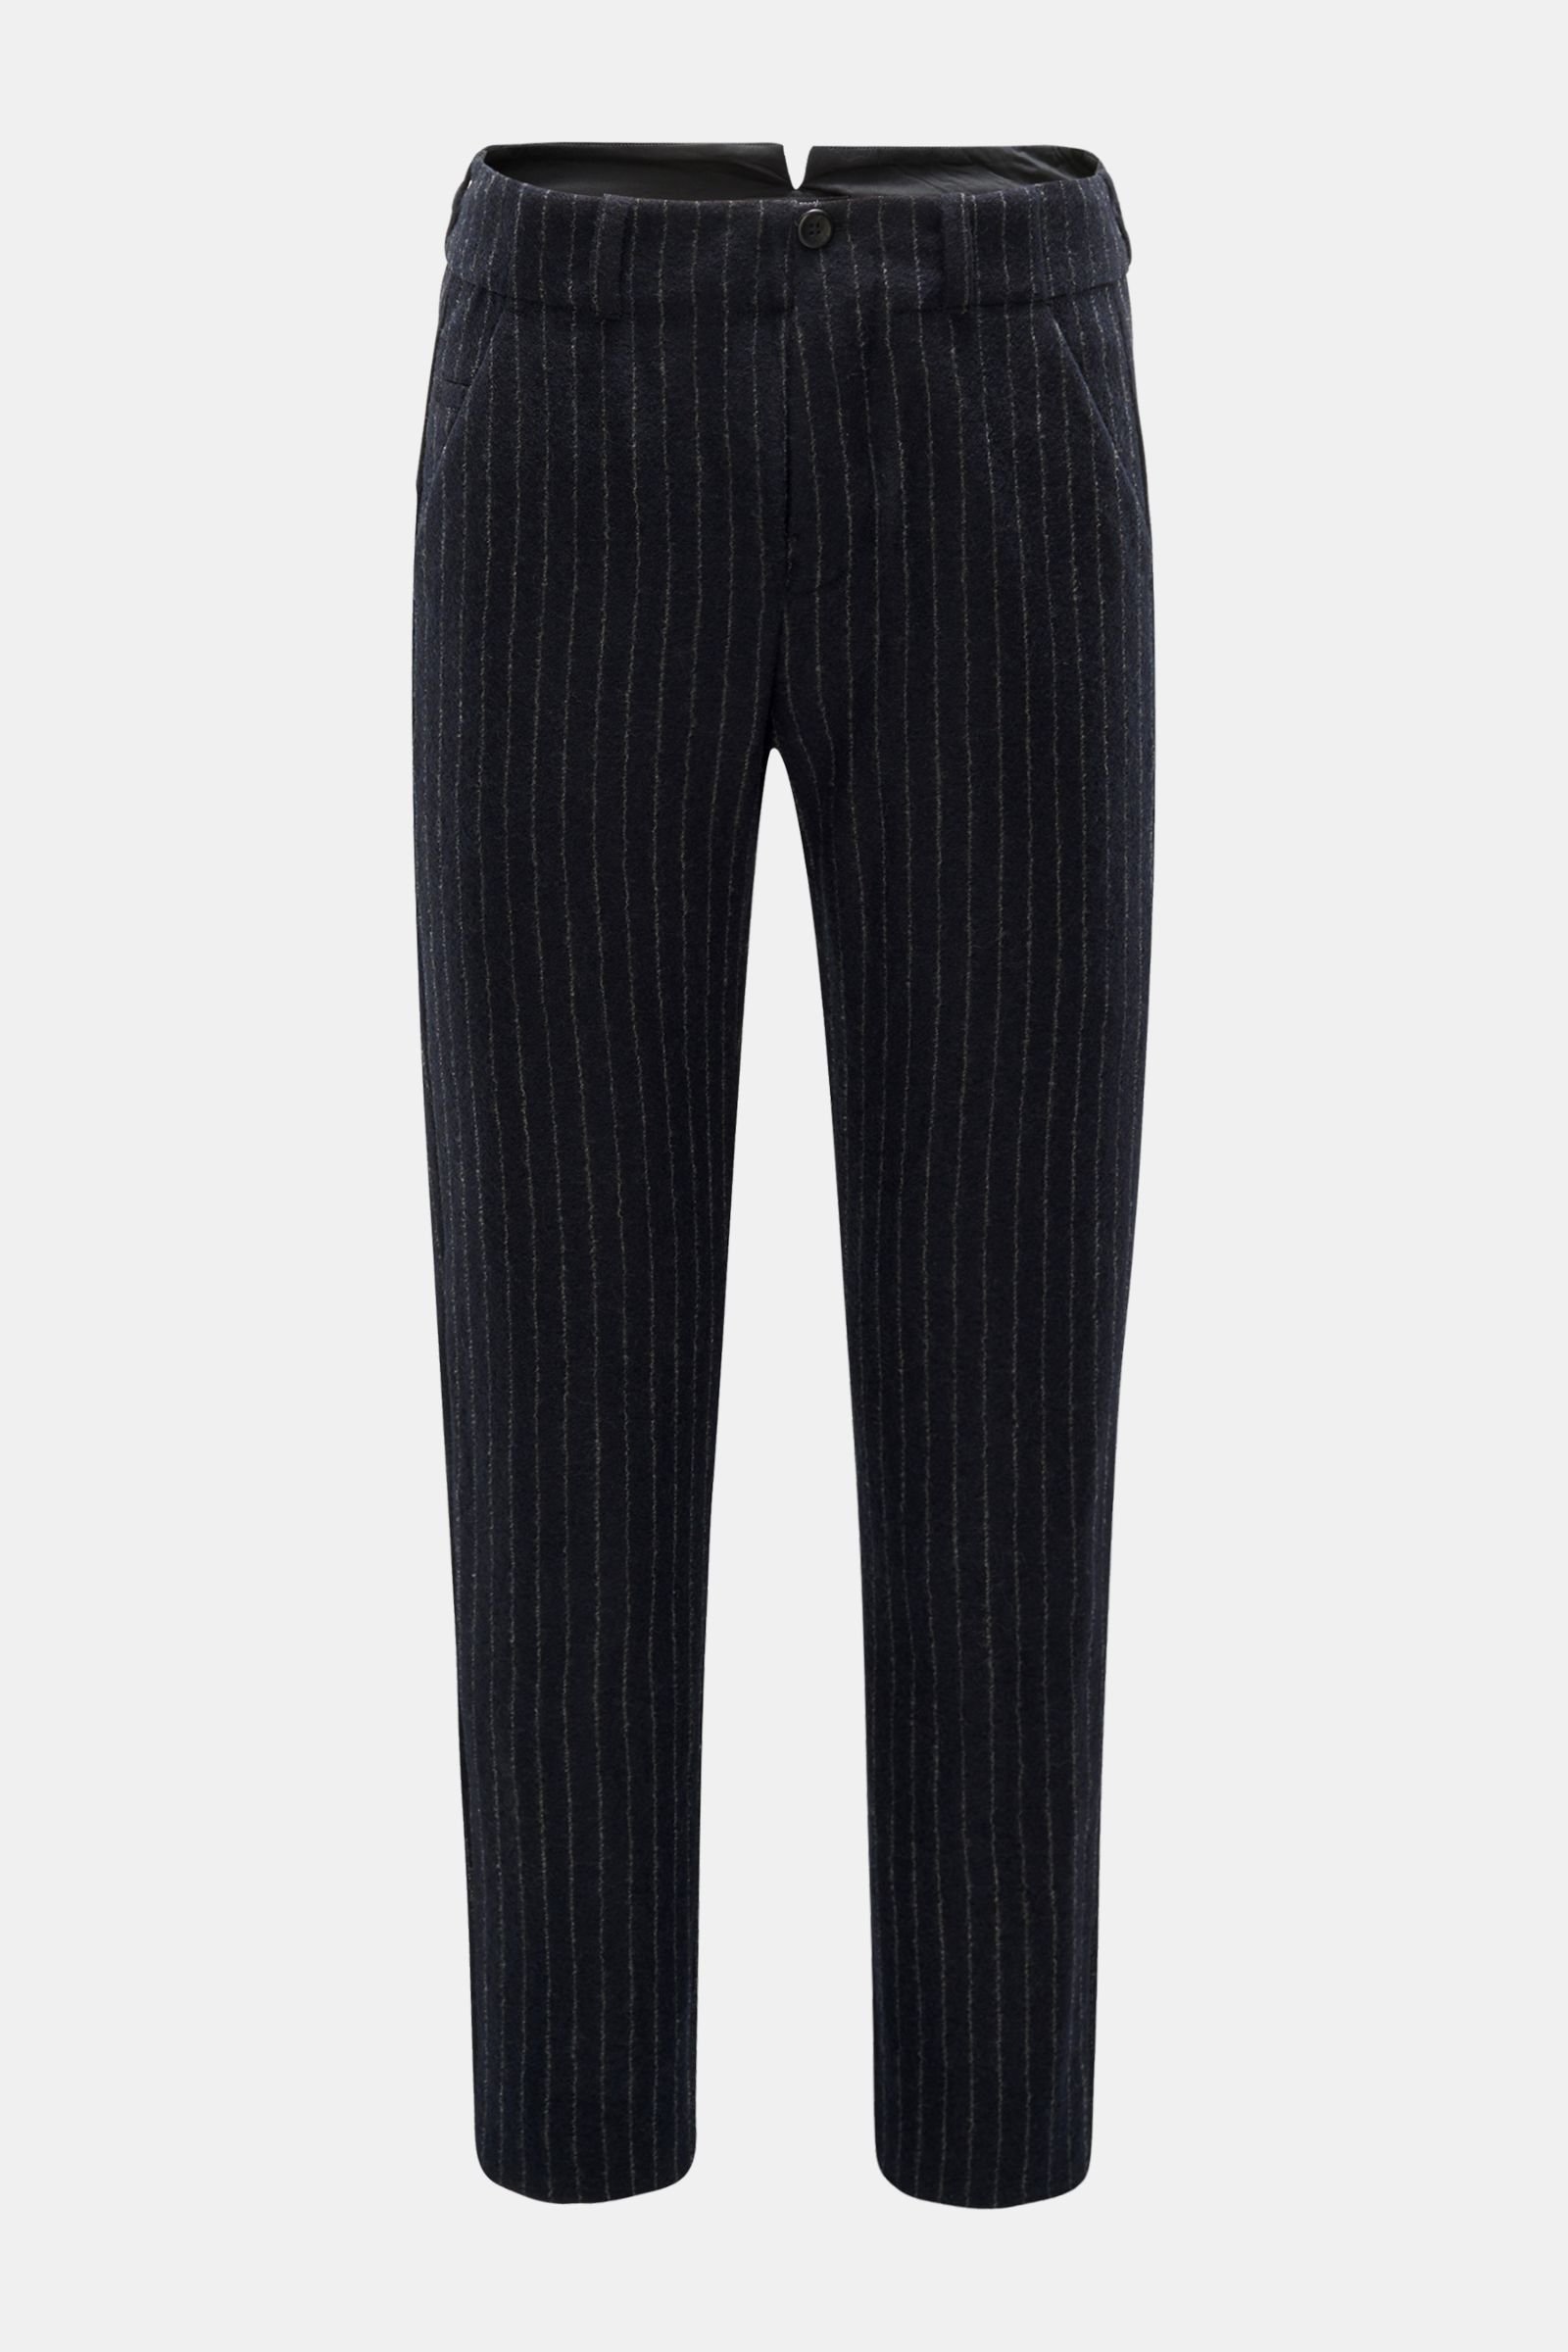 Wool trousers 'Tra21ck.5027' navy/grey striped